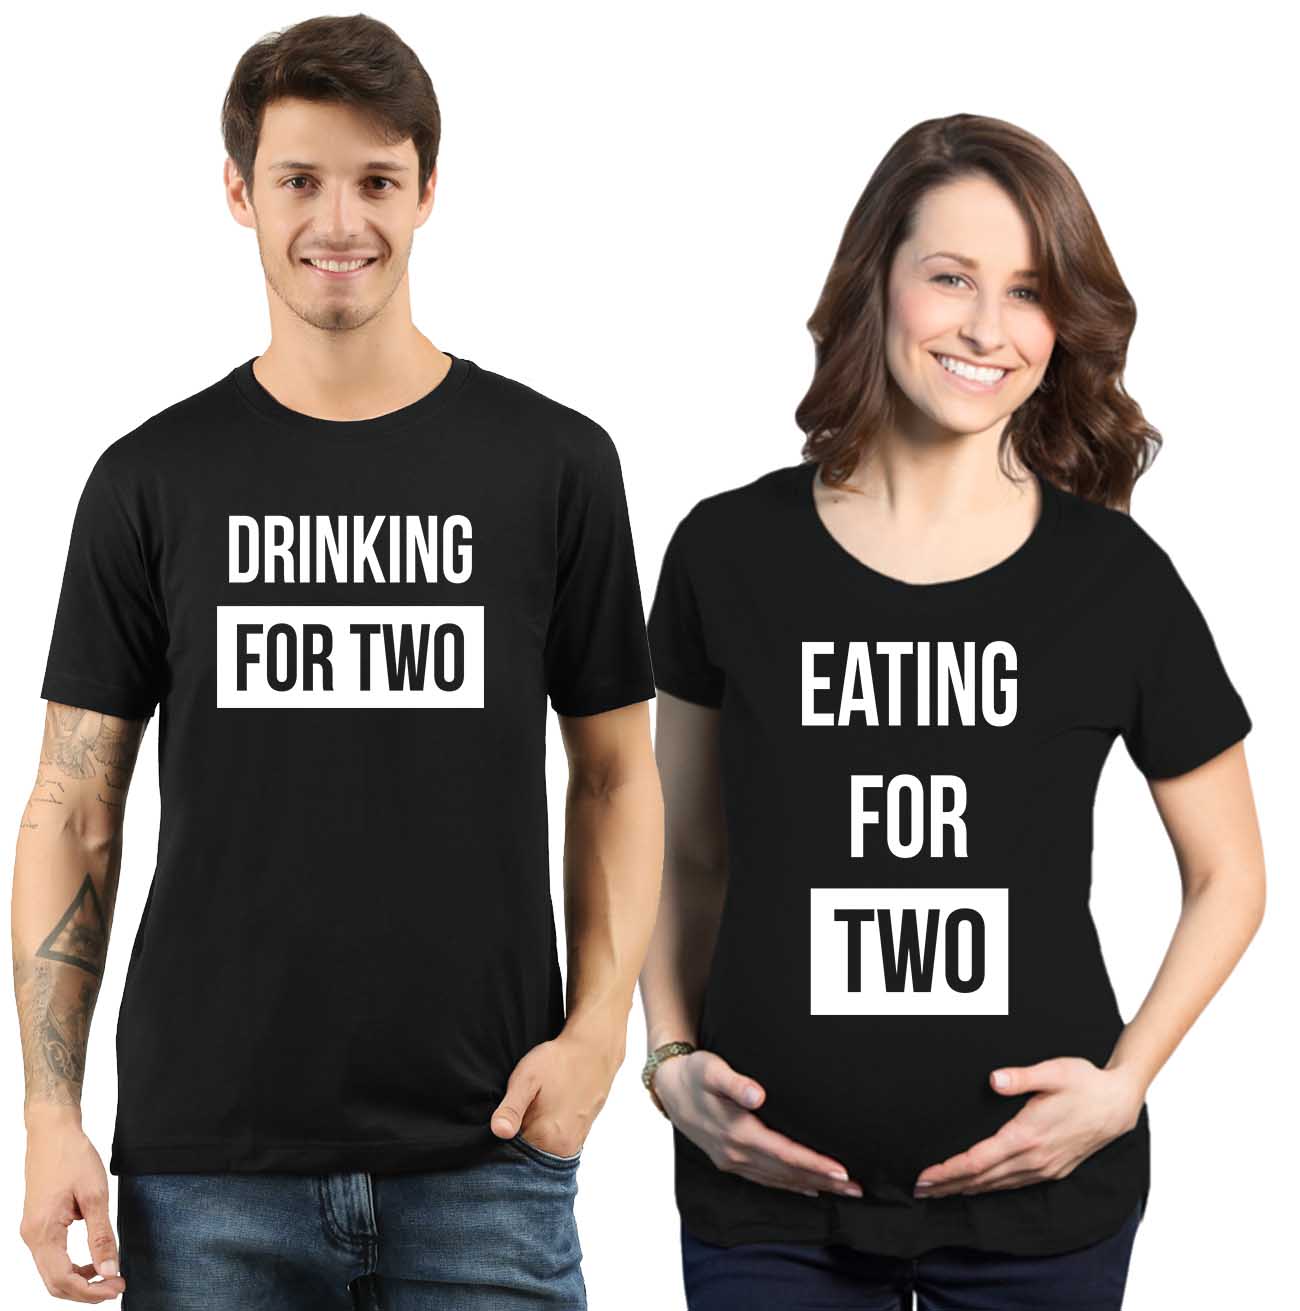 jopo maternity photoshoot ideas poses props indian pregnancy announcement quotes Proud Eating Drinking for two couples goal Matching T-shirts Black